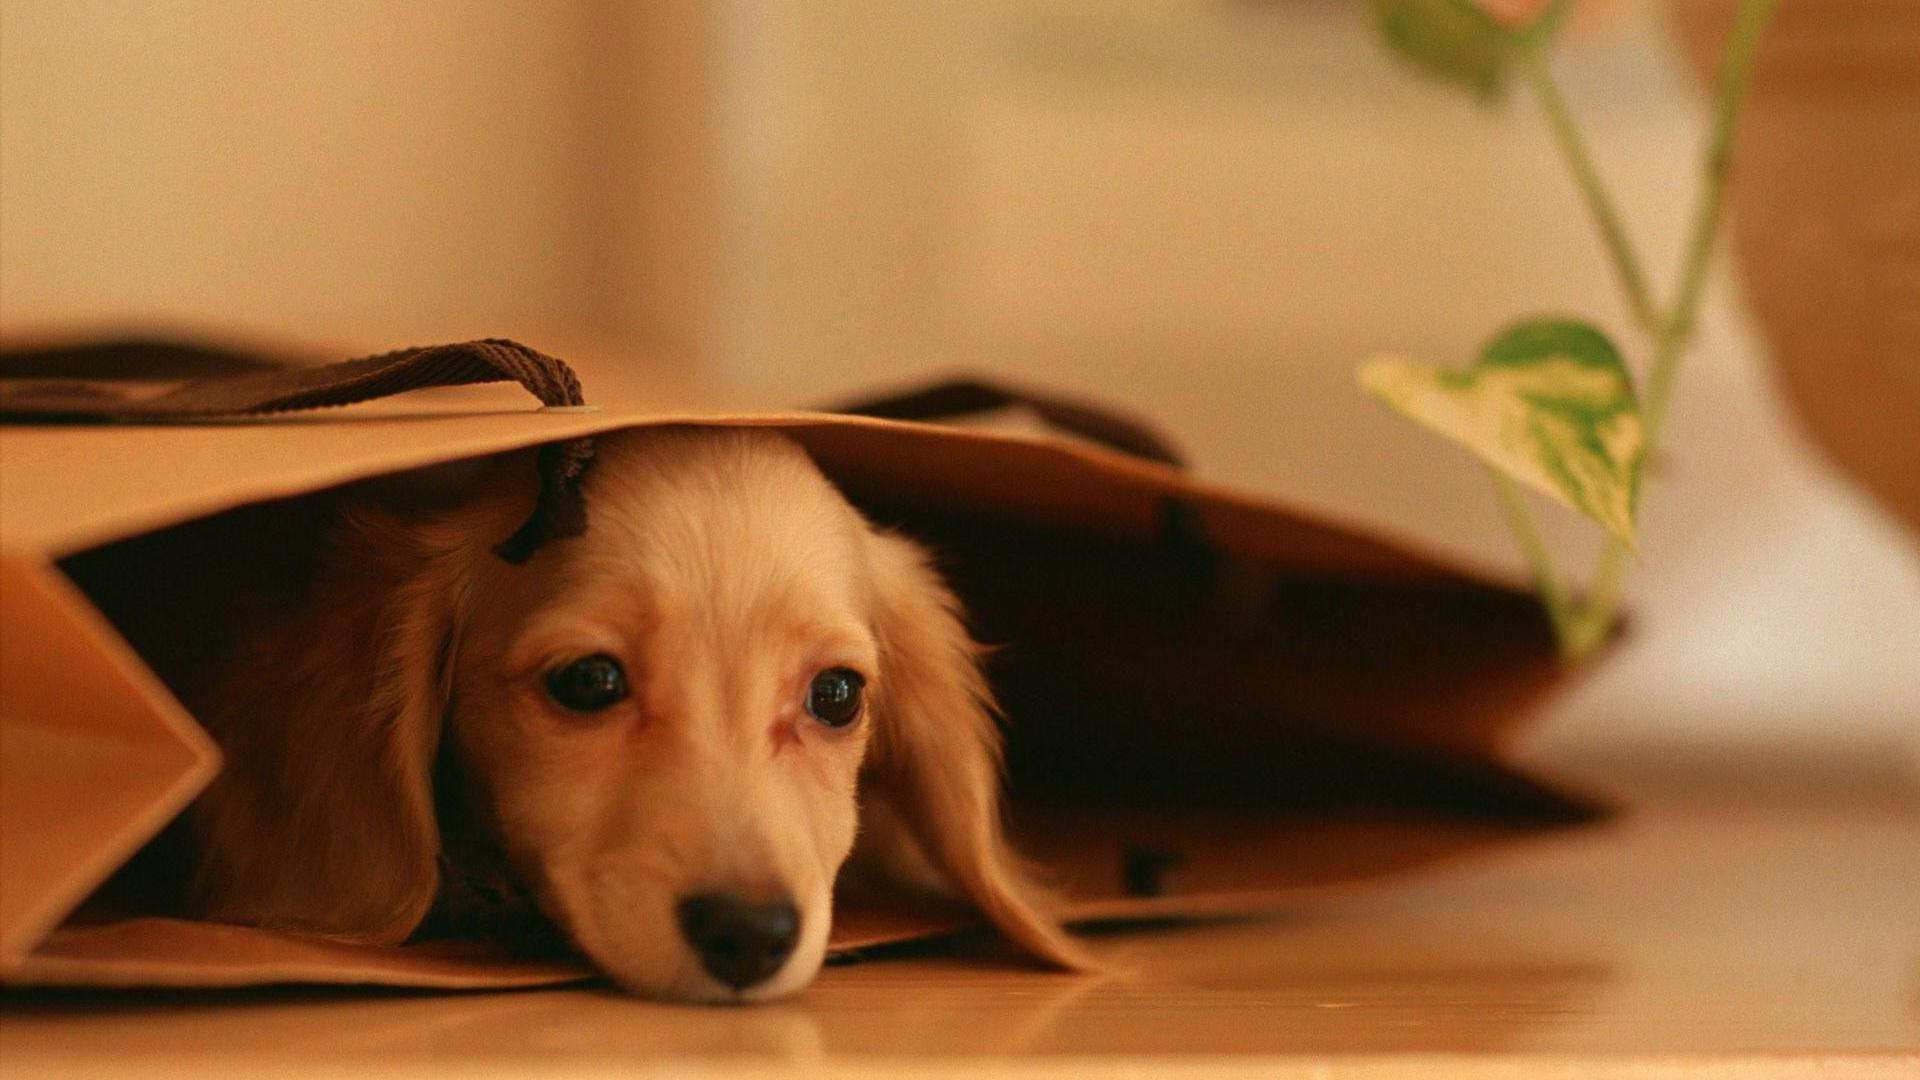 Wallpaper Hiding Dachshund Puppies HD Upload At March